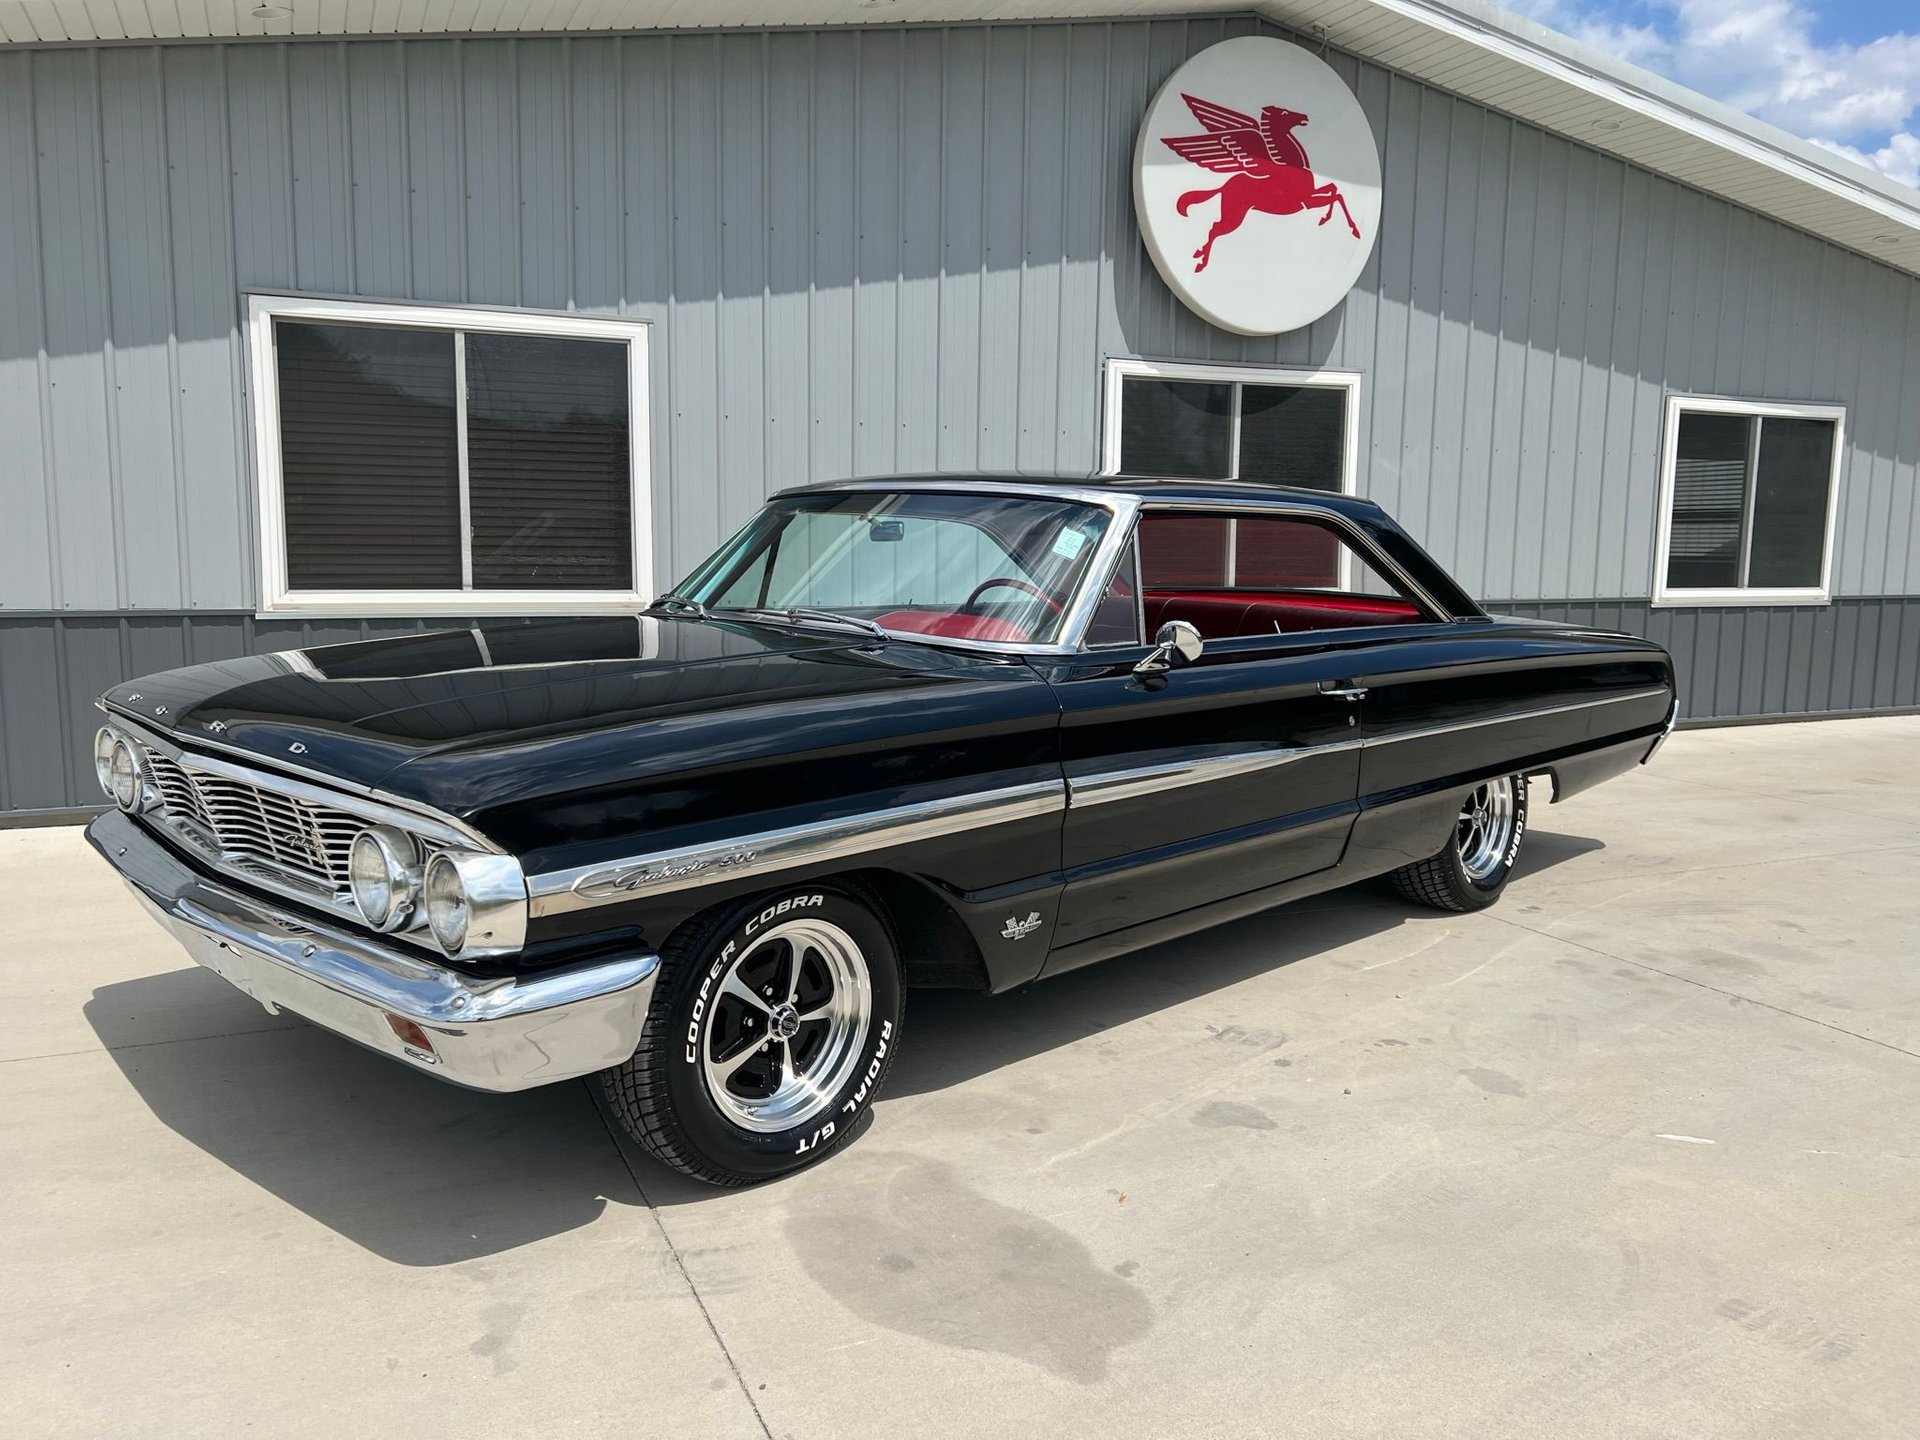 1964 Ford Galaxie 500 | Coyote Classics